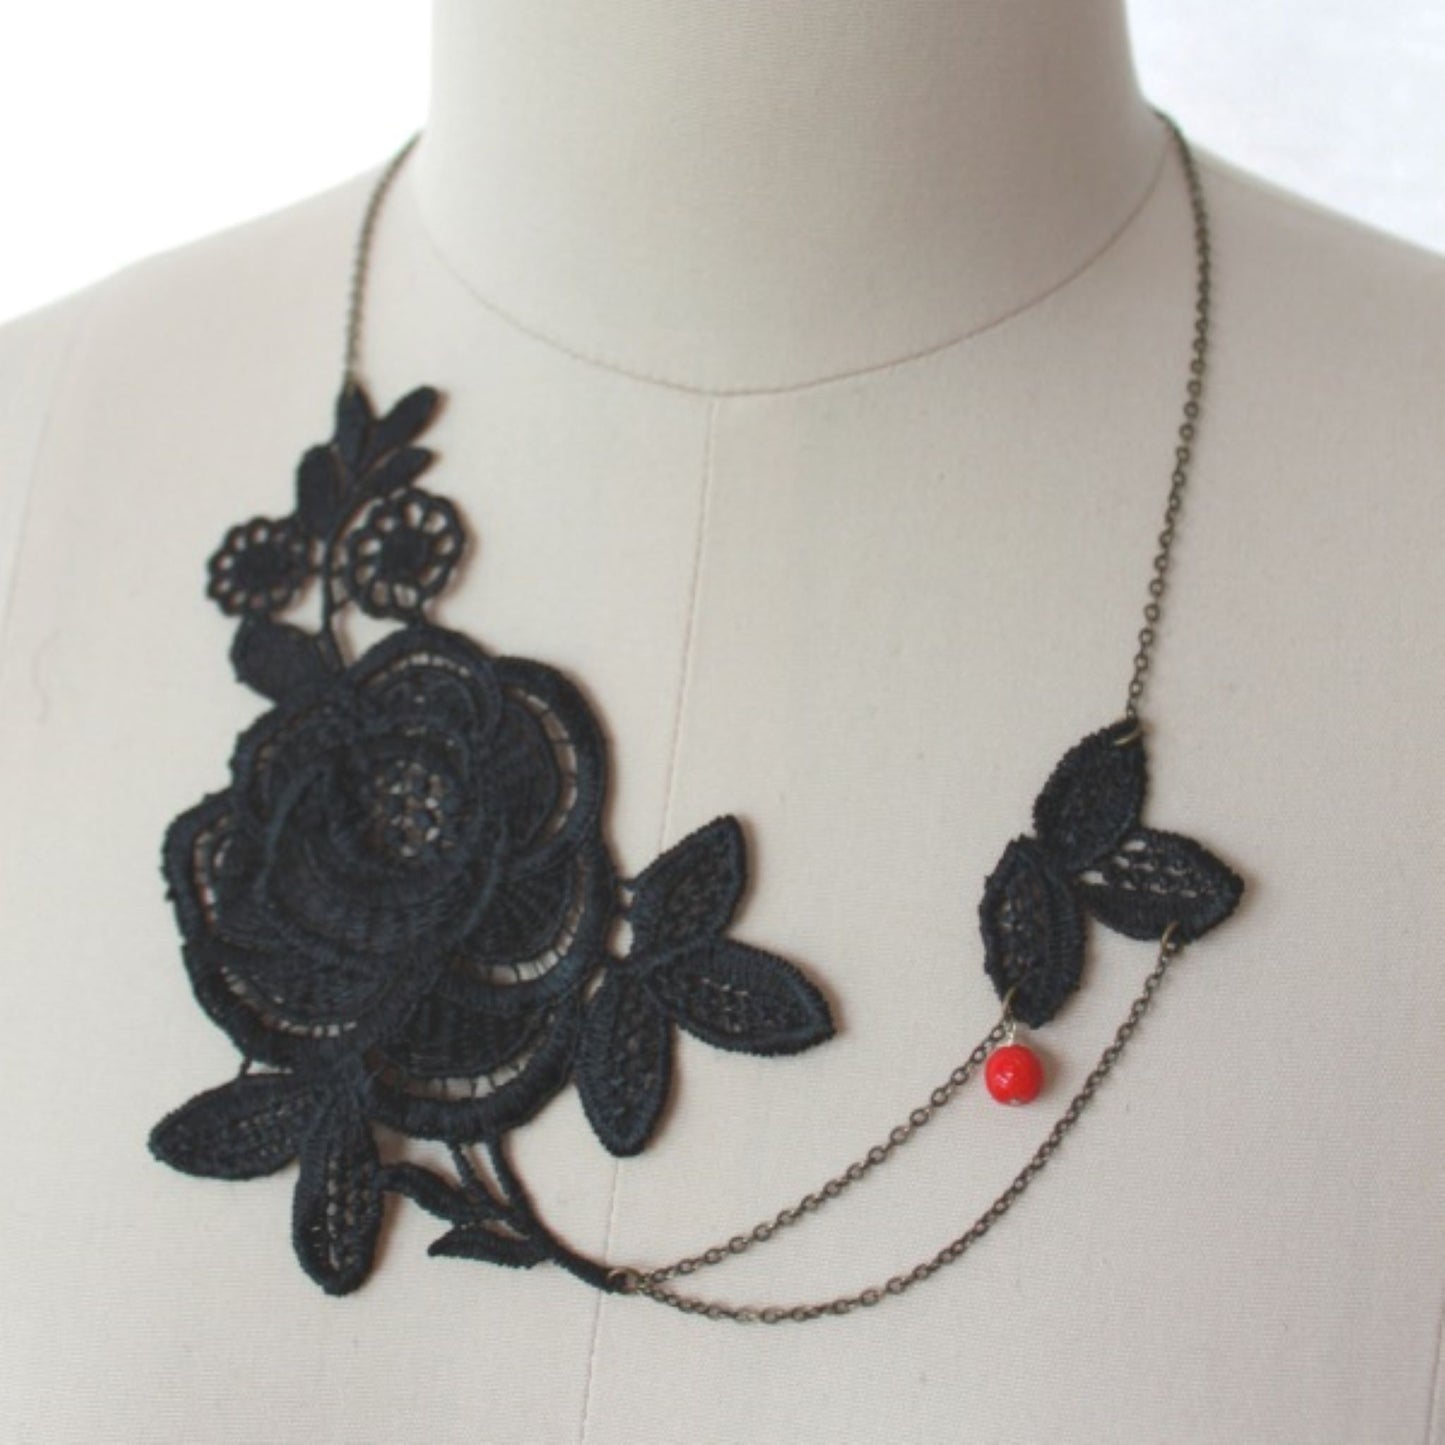 The Rose Garden Lace Necklace